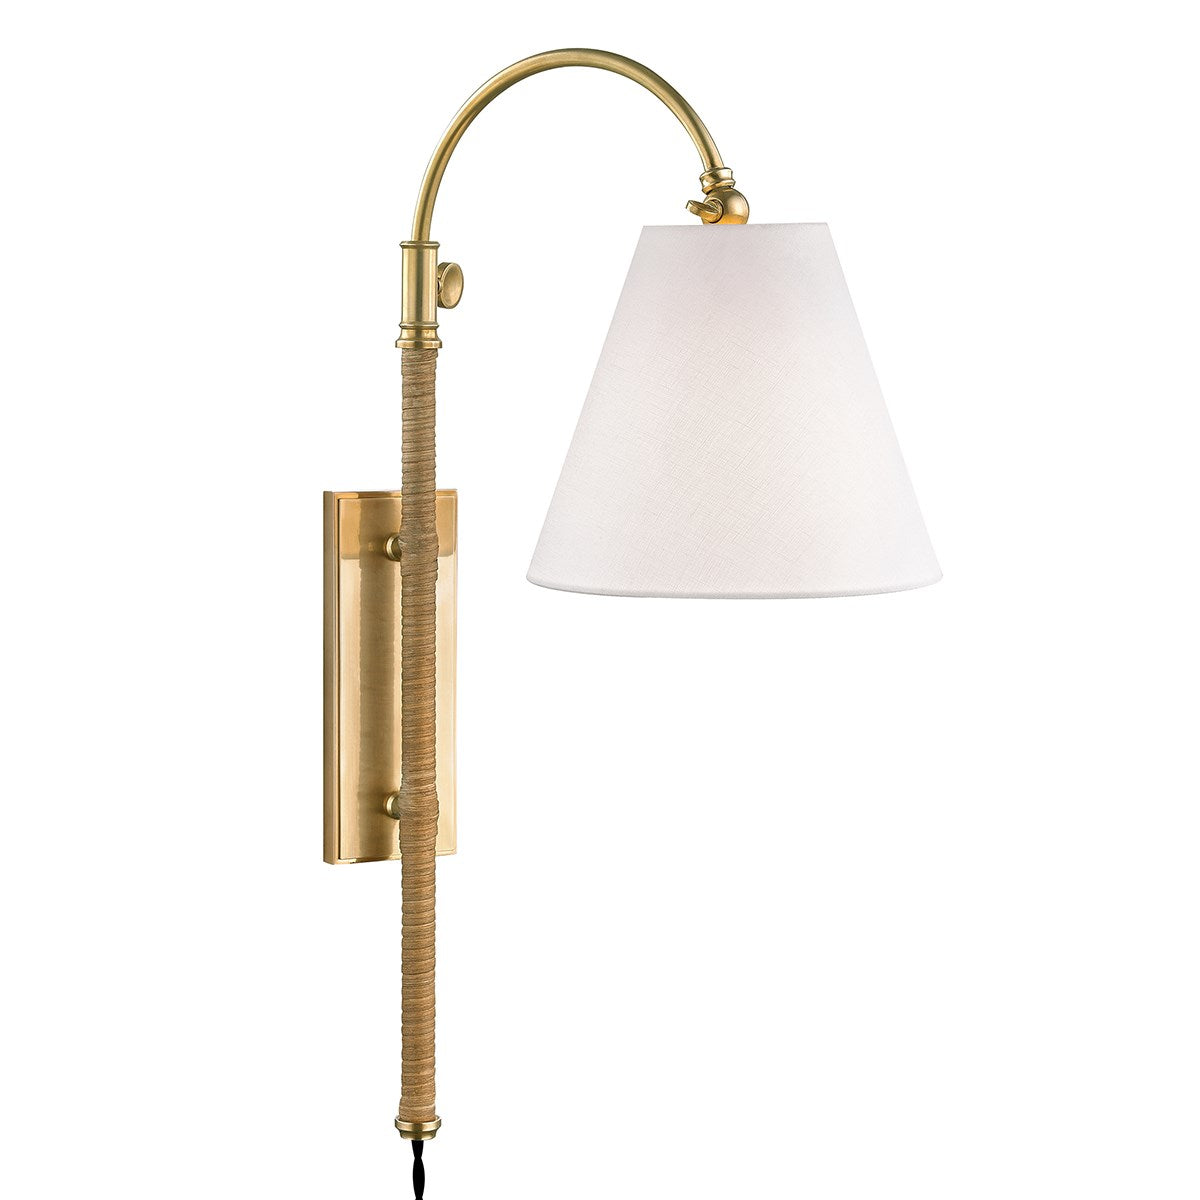 Curves No.1 - 1 LIGHT ADJUSTABLE WALL SCONCE W/ RATTAN ACCENT Wall Light Fixtures Hudson Valley Aged Brass  